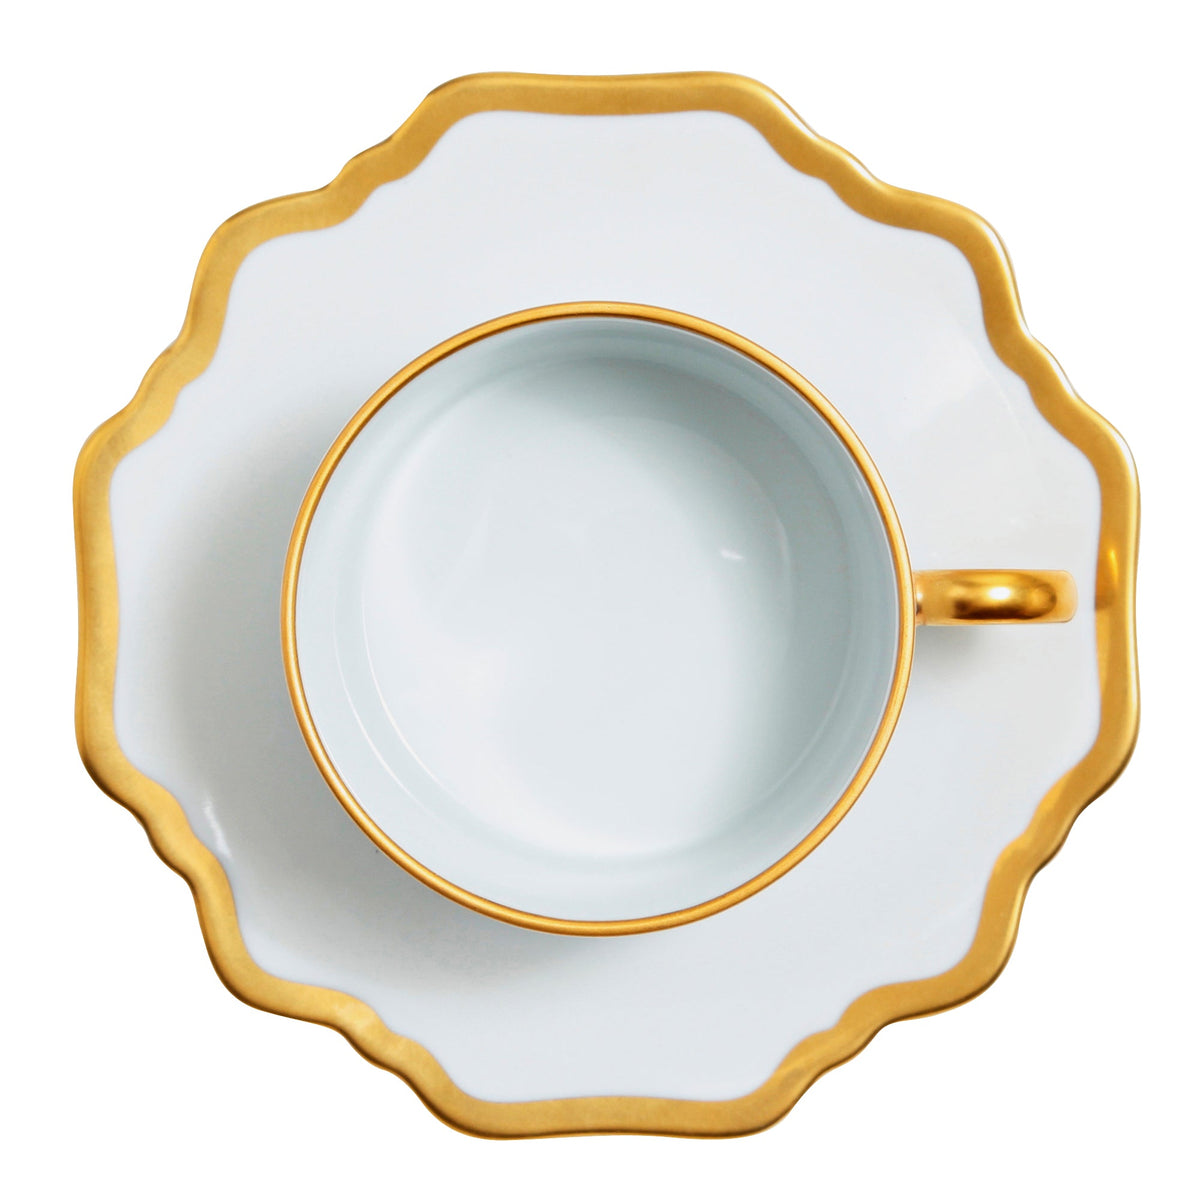 Antique White and Gold Tea Cup and Saucer